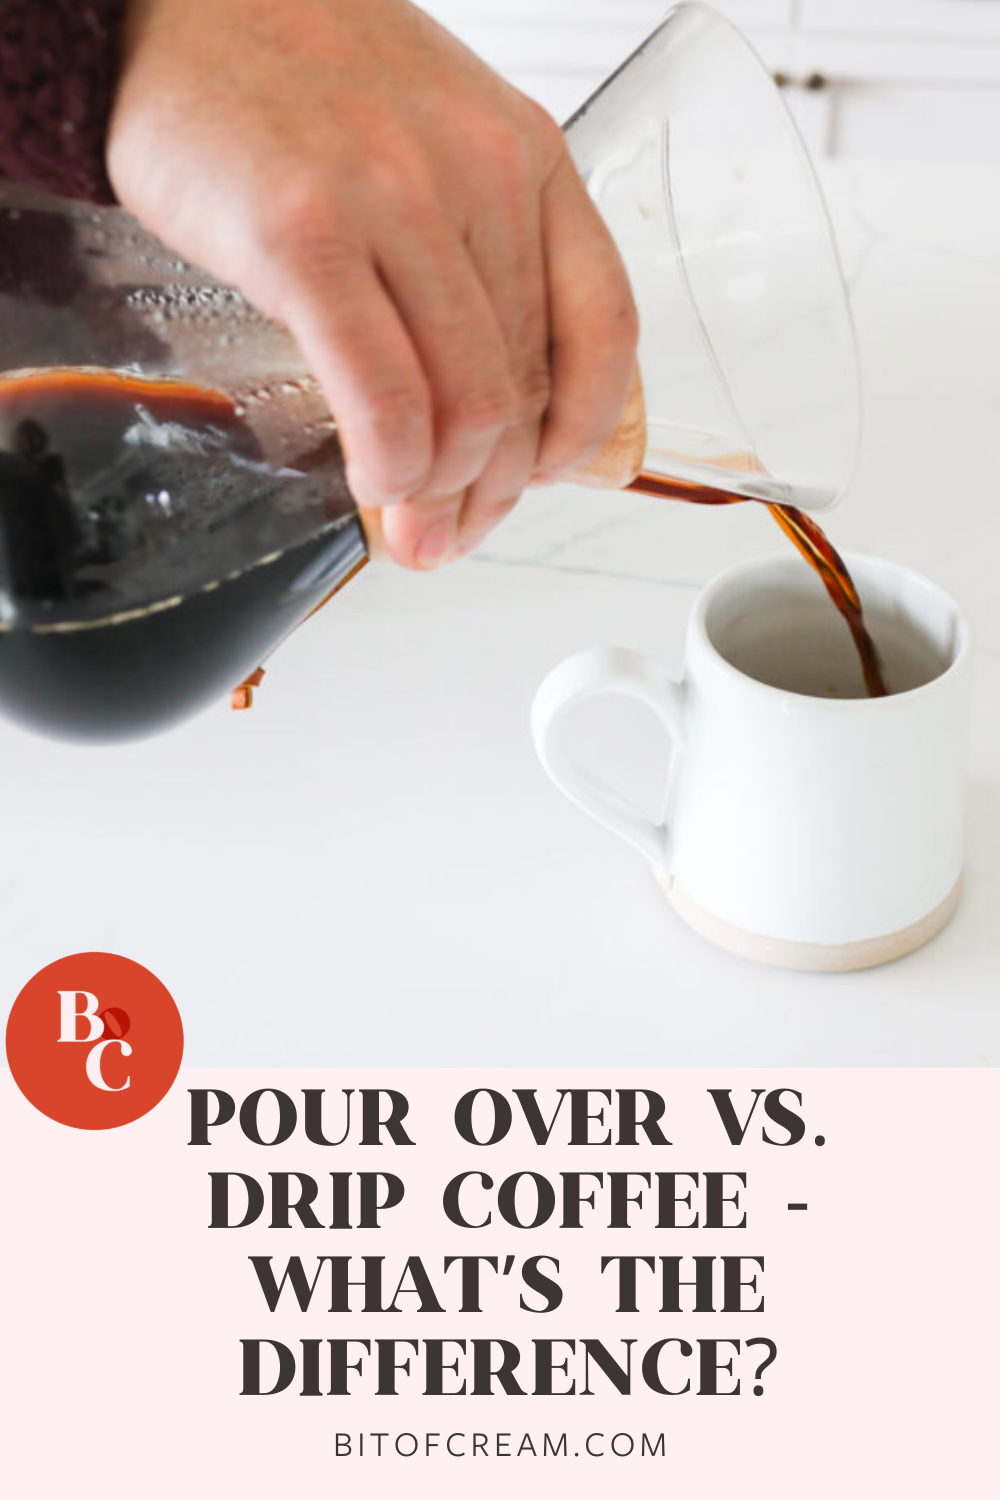 Pour over vs. drip coffee 